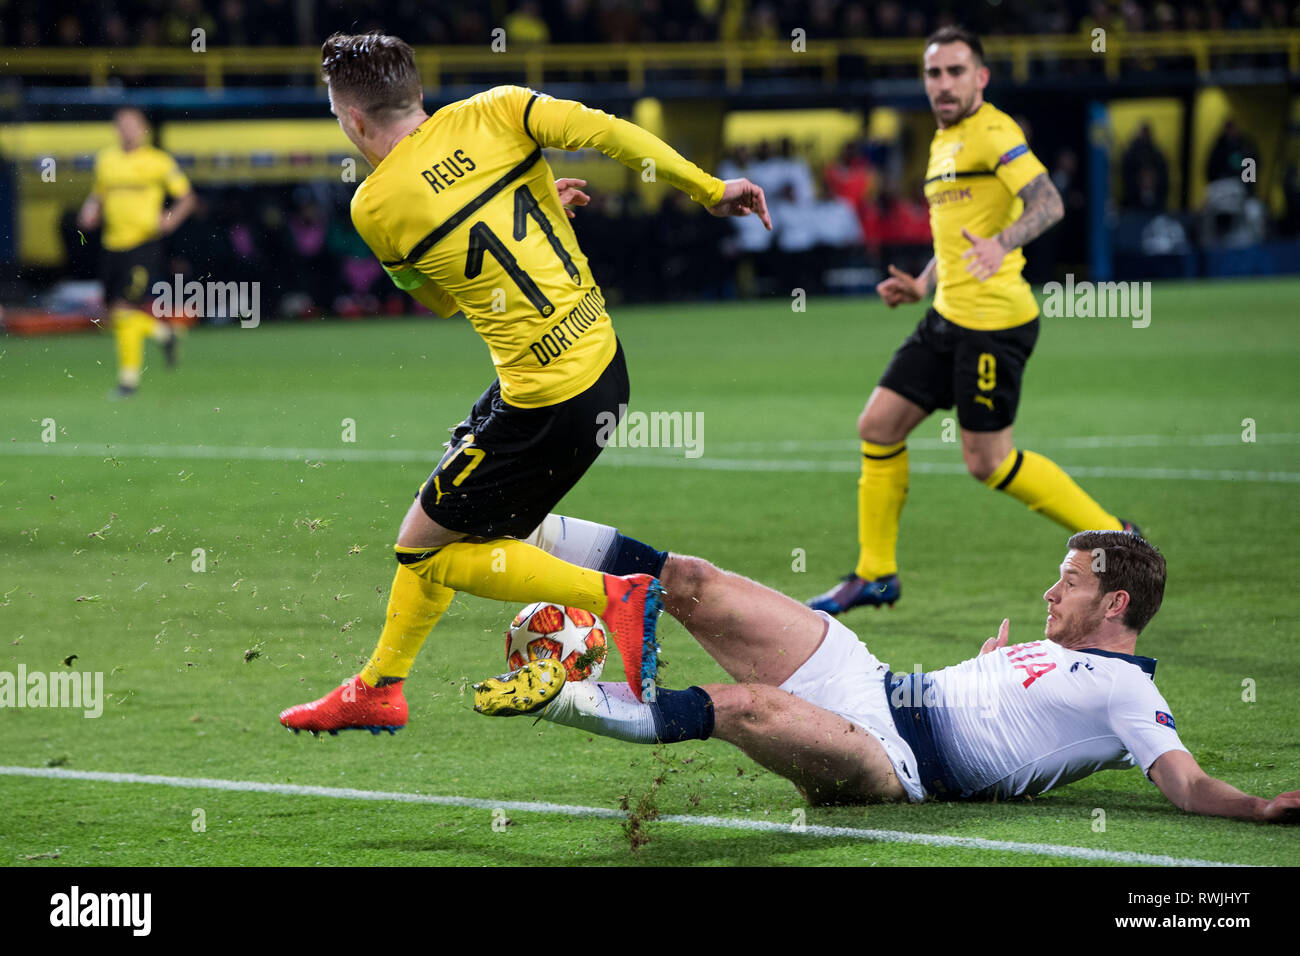 Marco REUS (left, left) is stopped by Jan VERTONGHEN (Spurs), action, duels, football Champions League, round of 16, Borussia Dortmund (DO) - Tottenham Hotspur (Spurs) 0: 1, on 05.03.2019 in Dortmund/Germany, | Usage worldwide Stock Photo